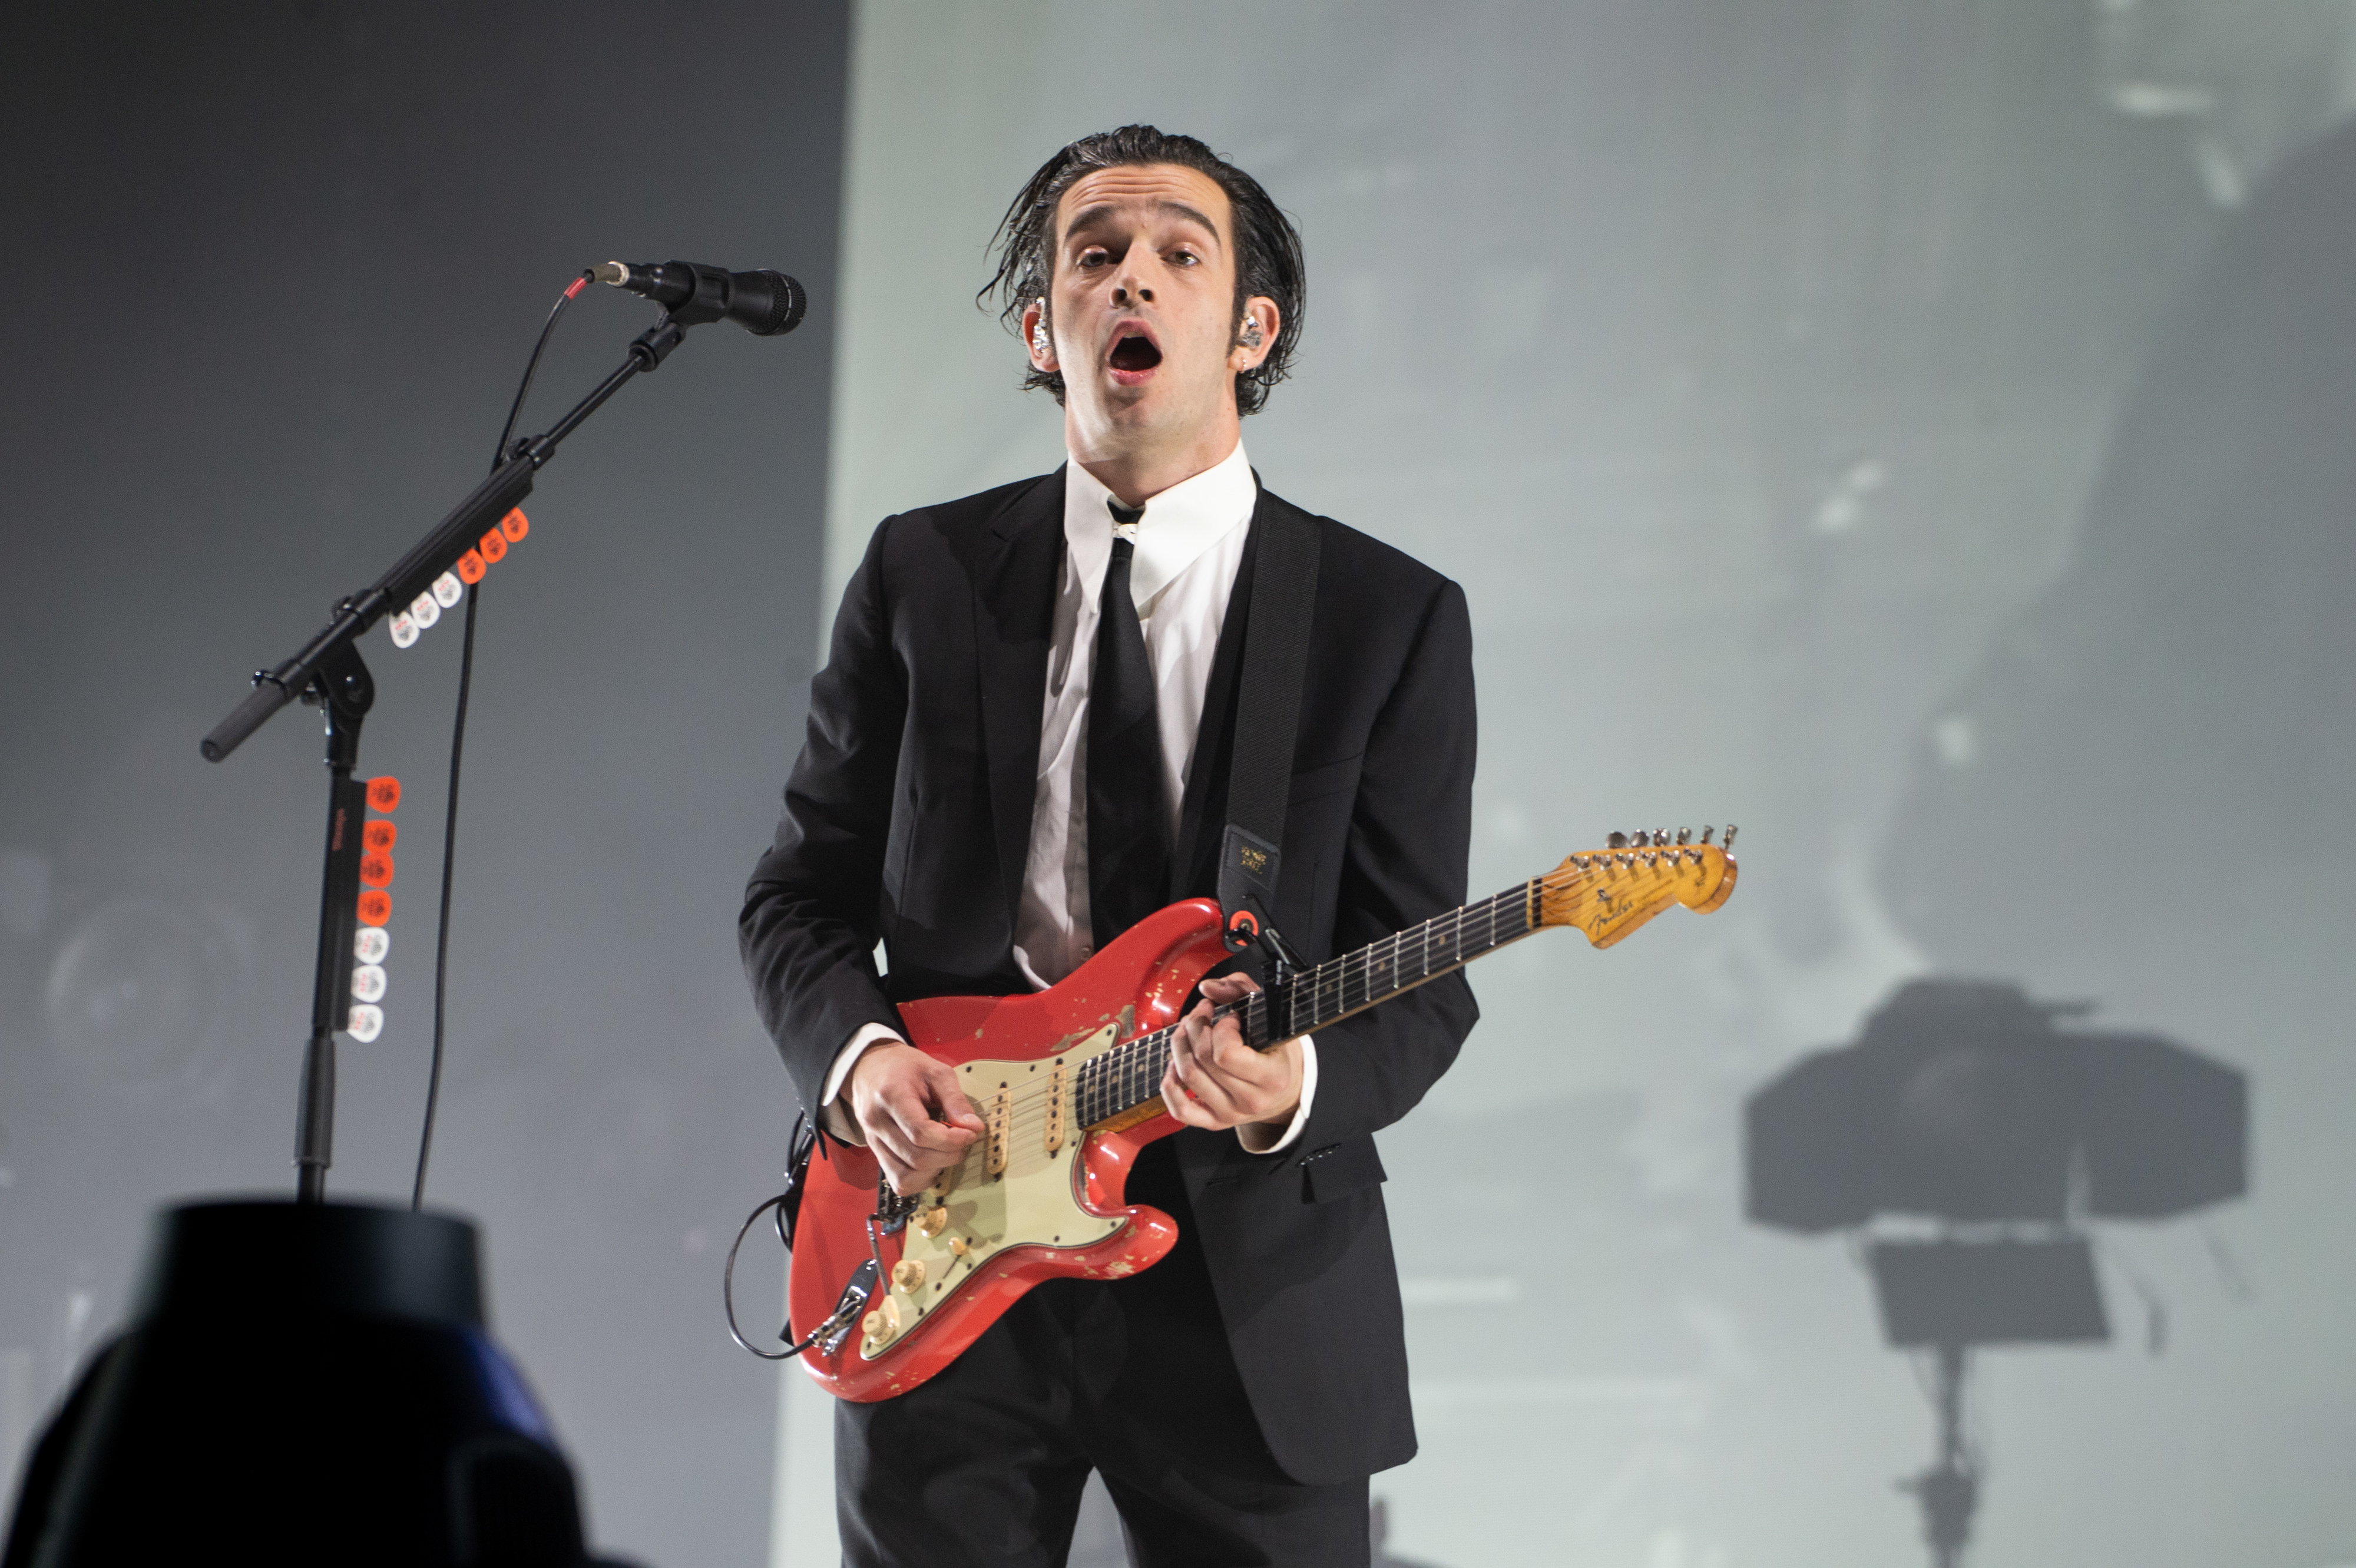 Matty Healy with a guitar wearing a suit and tie performing on stage